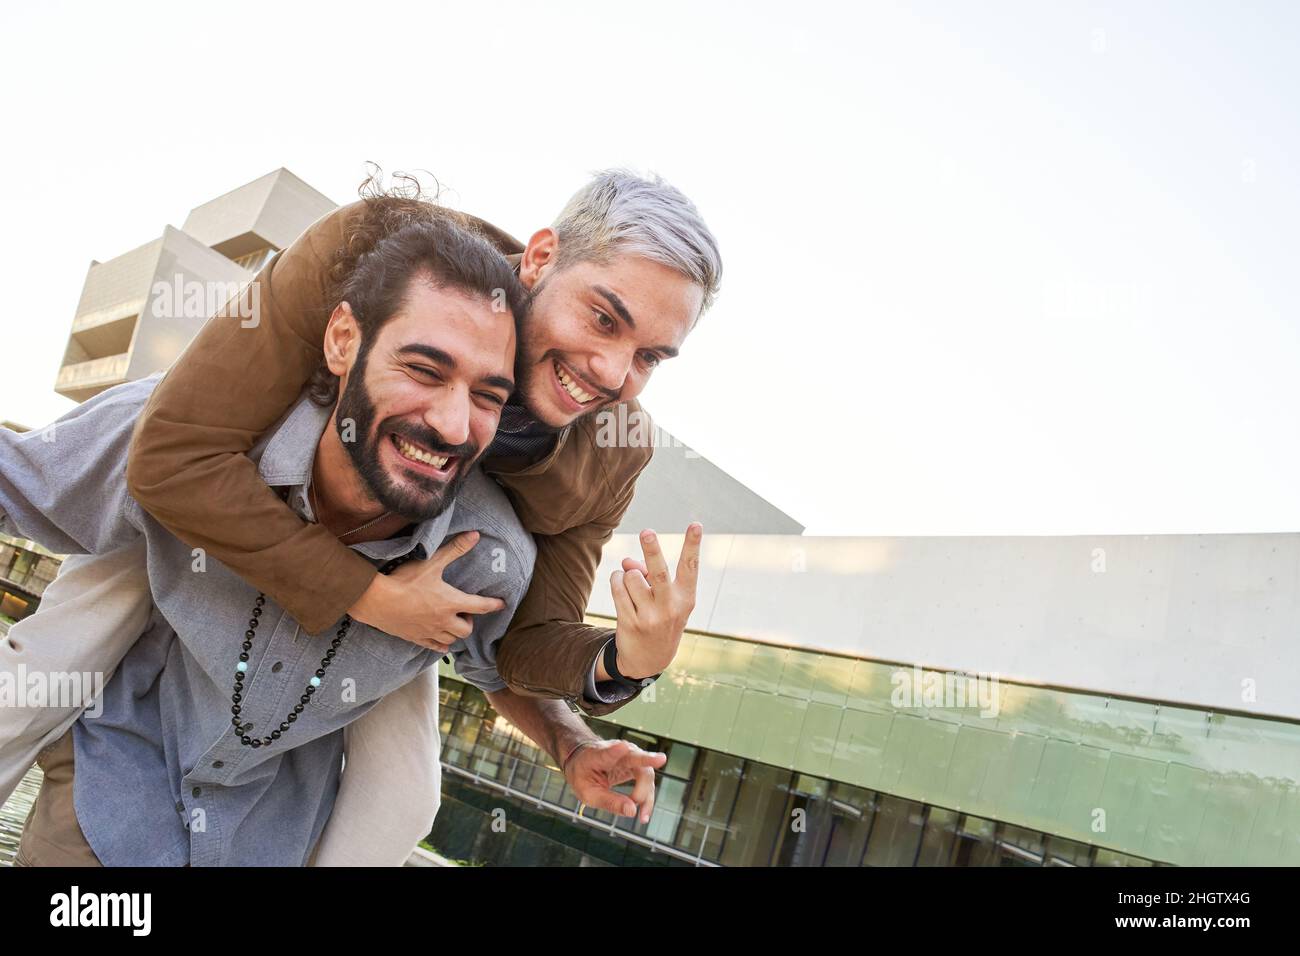 Happy gay couple man embrace in love outdoors. Cheerful LGTB people having fun together Stock Photo